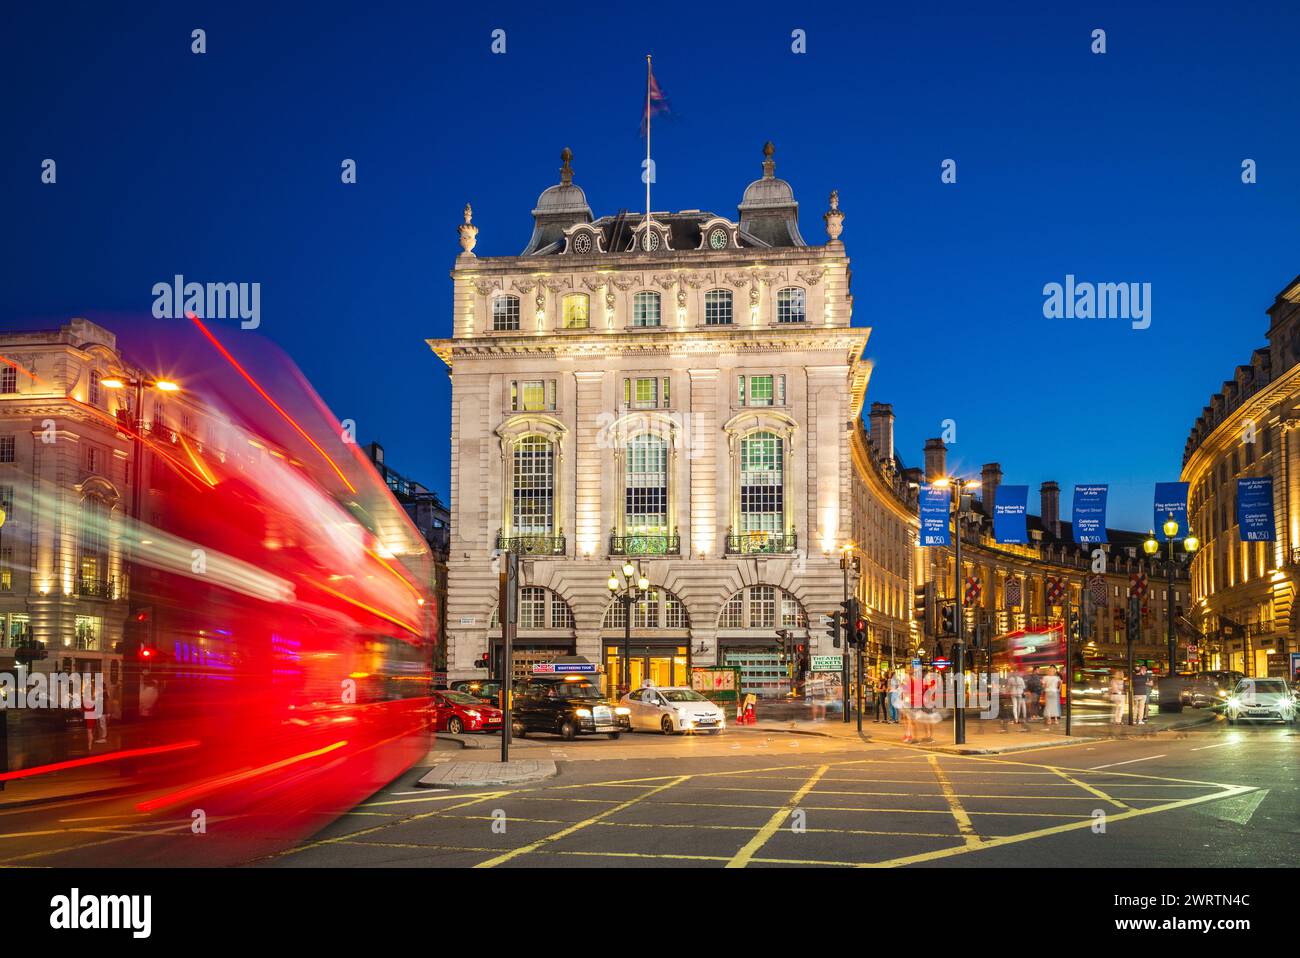 July 3, 2018: Night view of piccadilly circus, a road junction and public space located in the City of Westminster, London, UK, and was built in 1819 Stock Photo